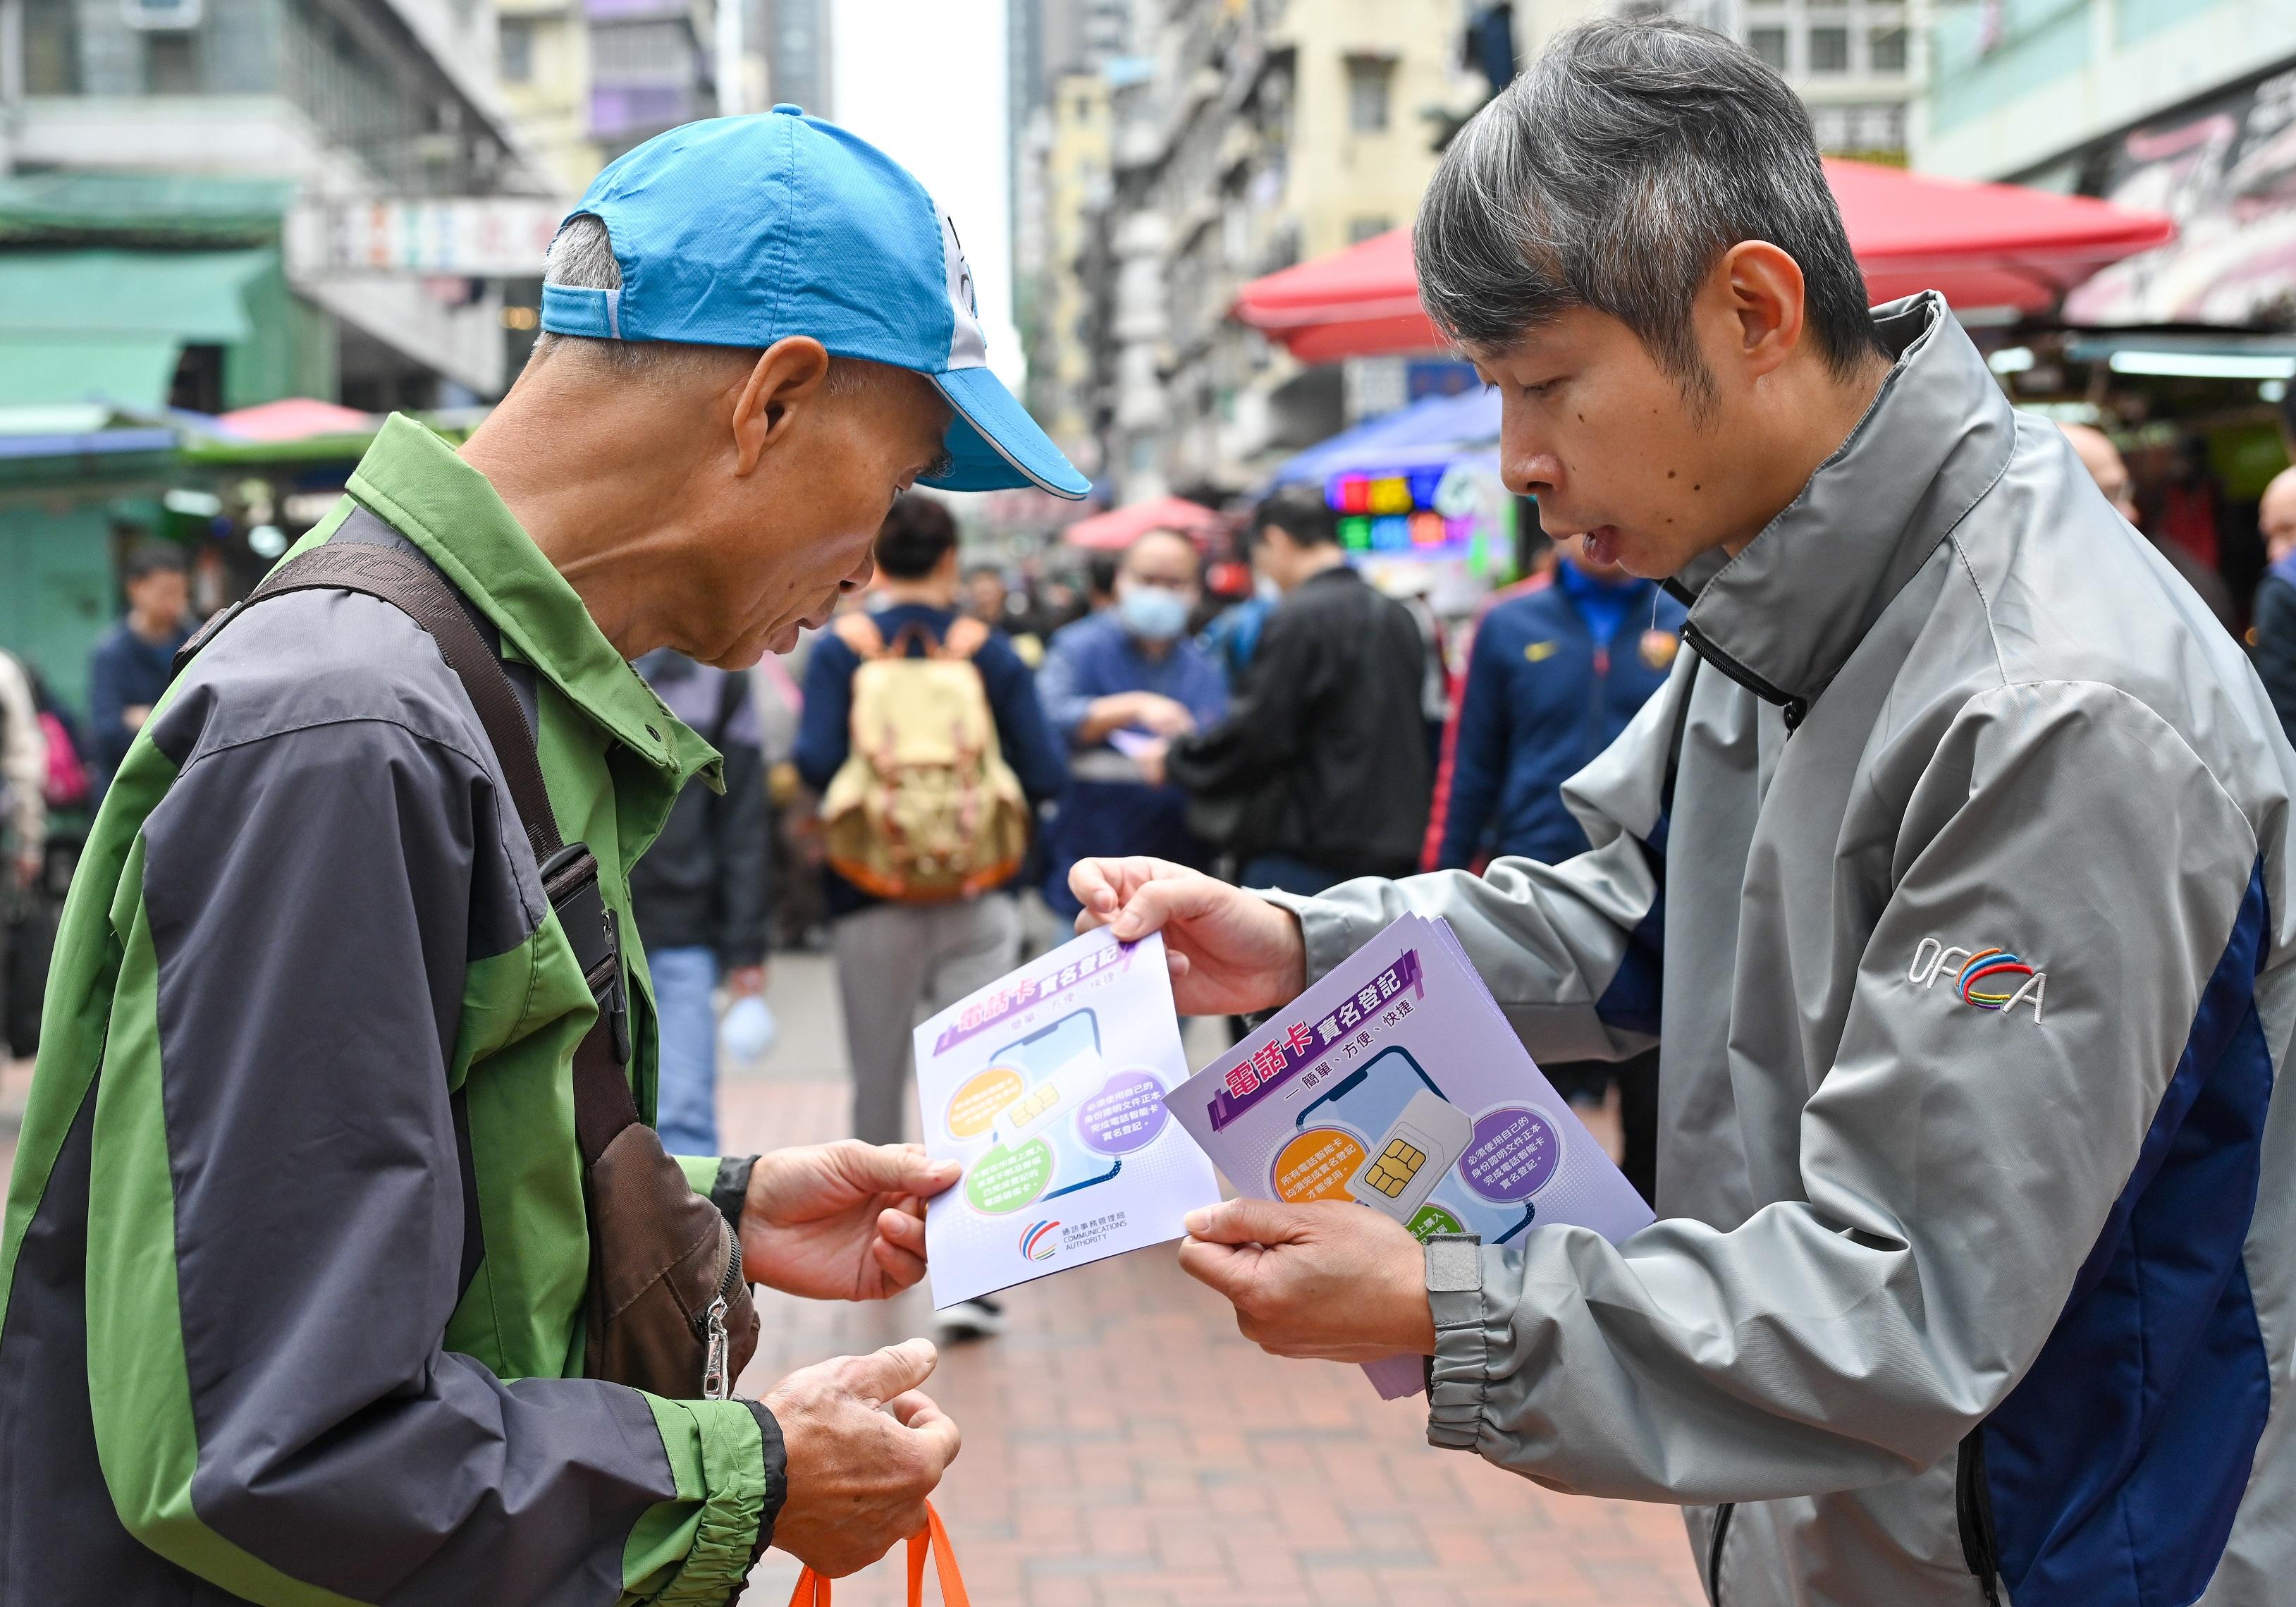 The Office of the Communications Authority conducted today (February 6) market surveillance, publicity and education activities around Apliu Street in Sham Shui Po on real-name registration for SIM cards before the Lunar New Year, and distributed pamphlets to members of the public reminding them to complete registration using their own original identity document, and not to purchase or resell registered pre-paid SIM cards.